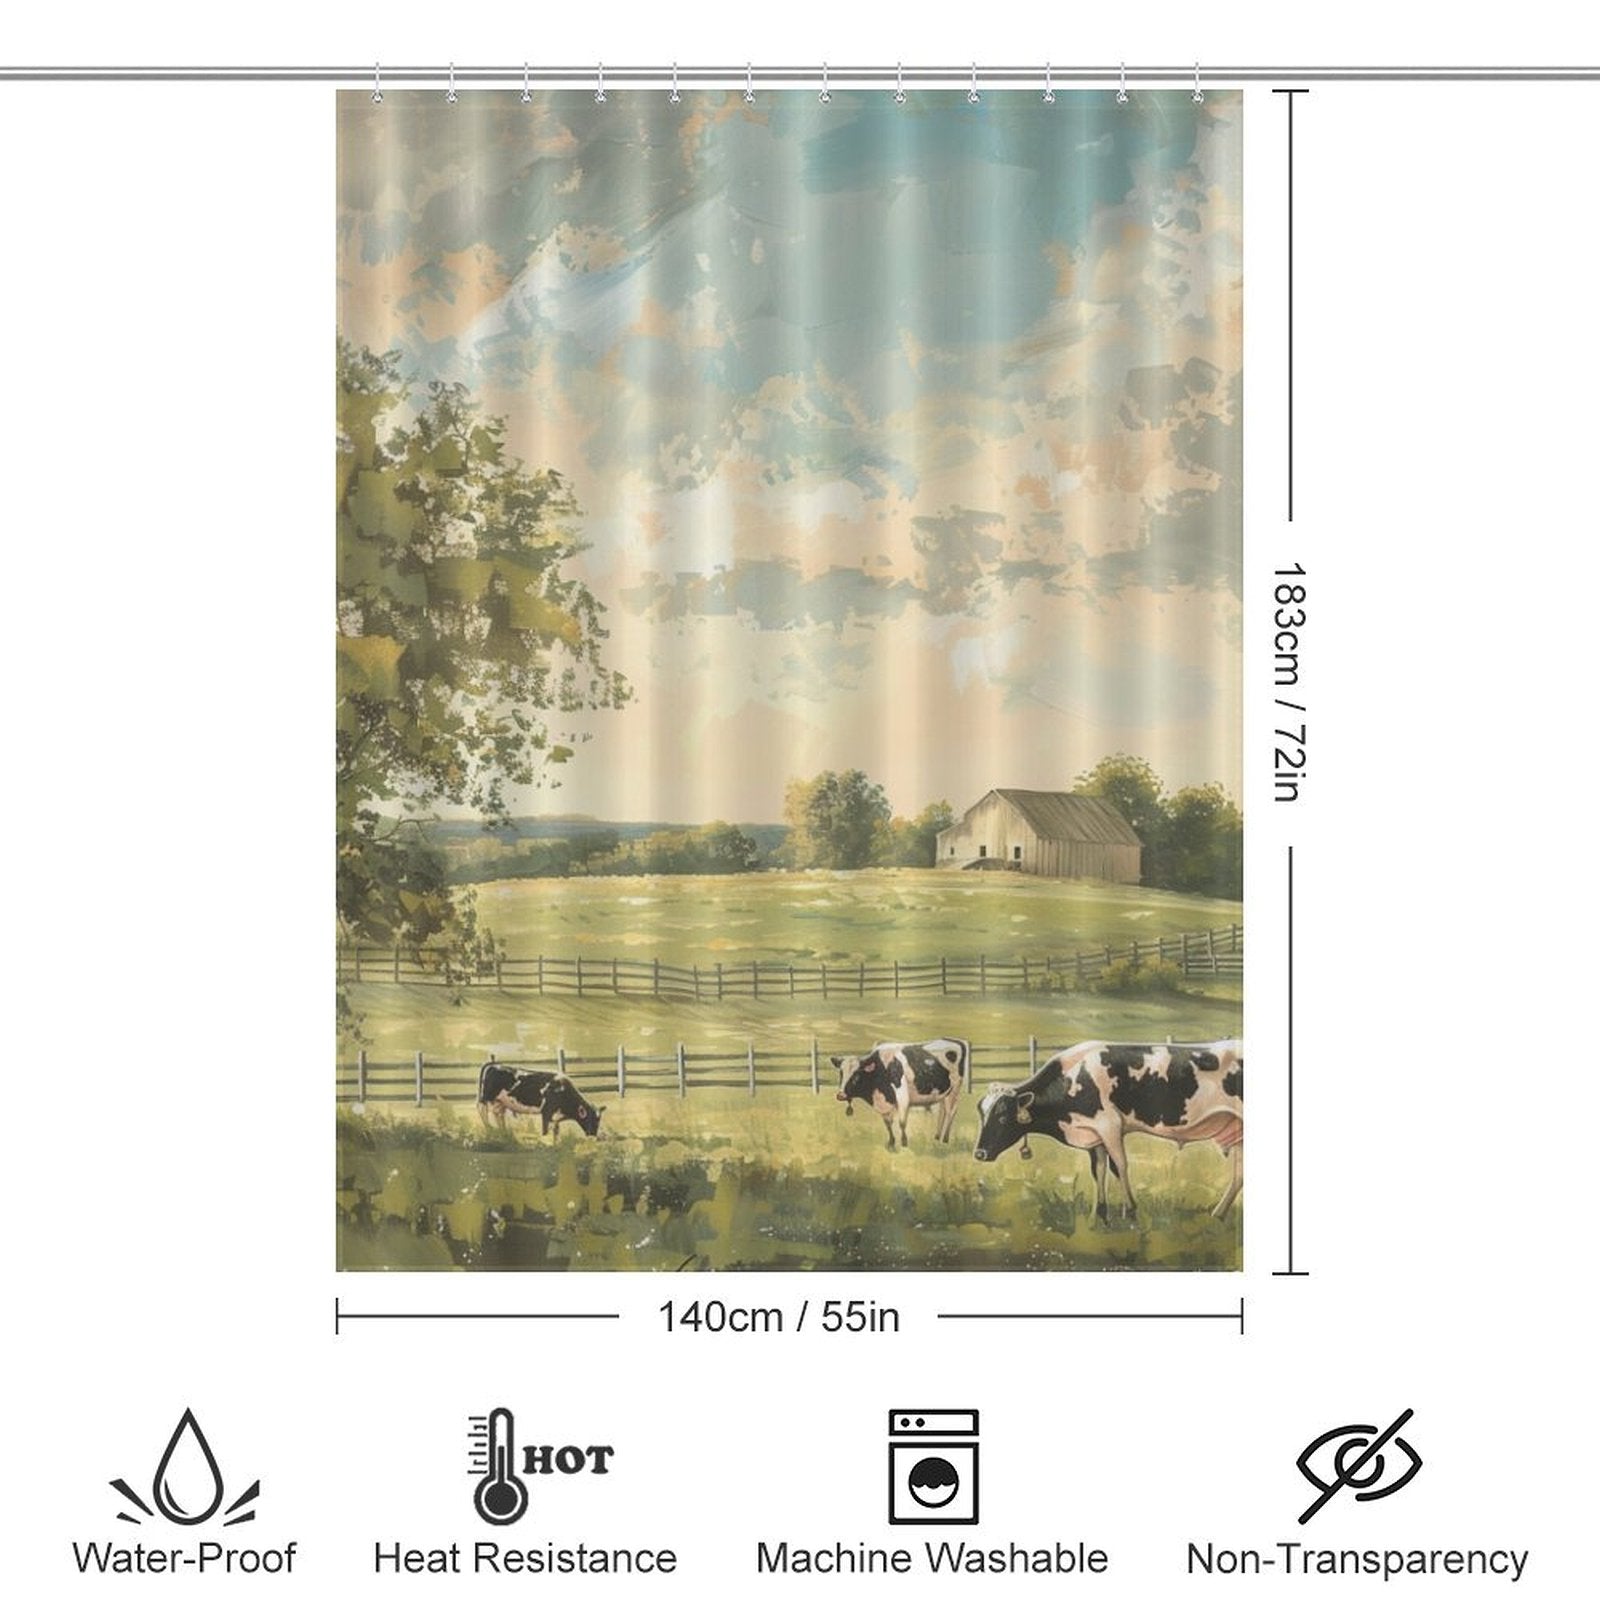 Rustic Tranquility Cow Shower Curtain